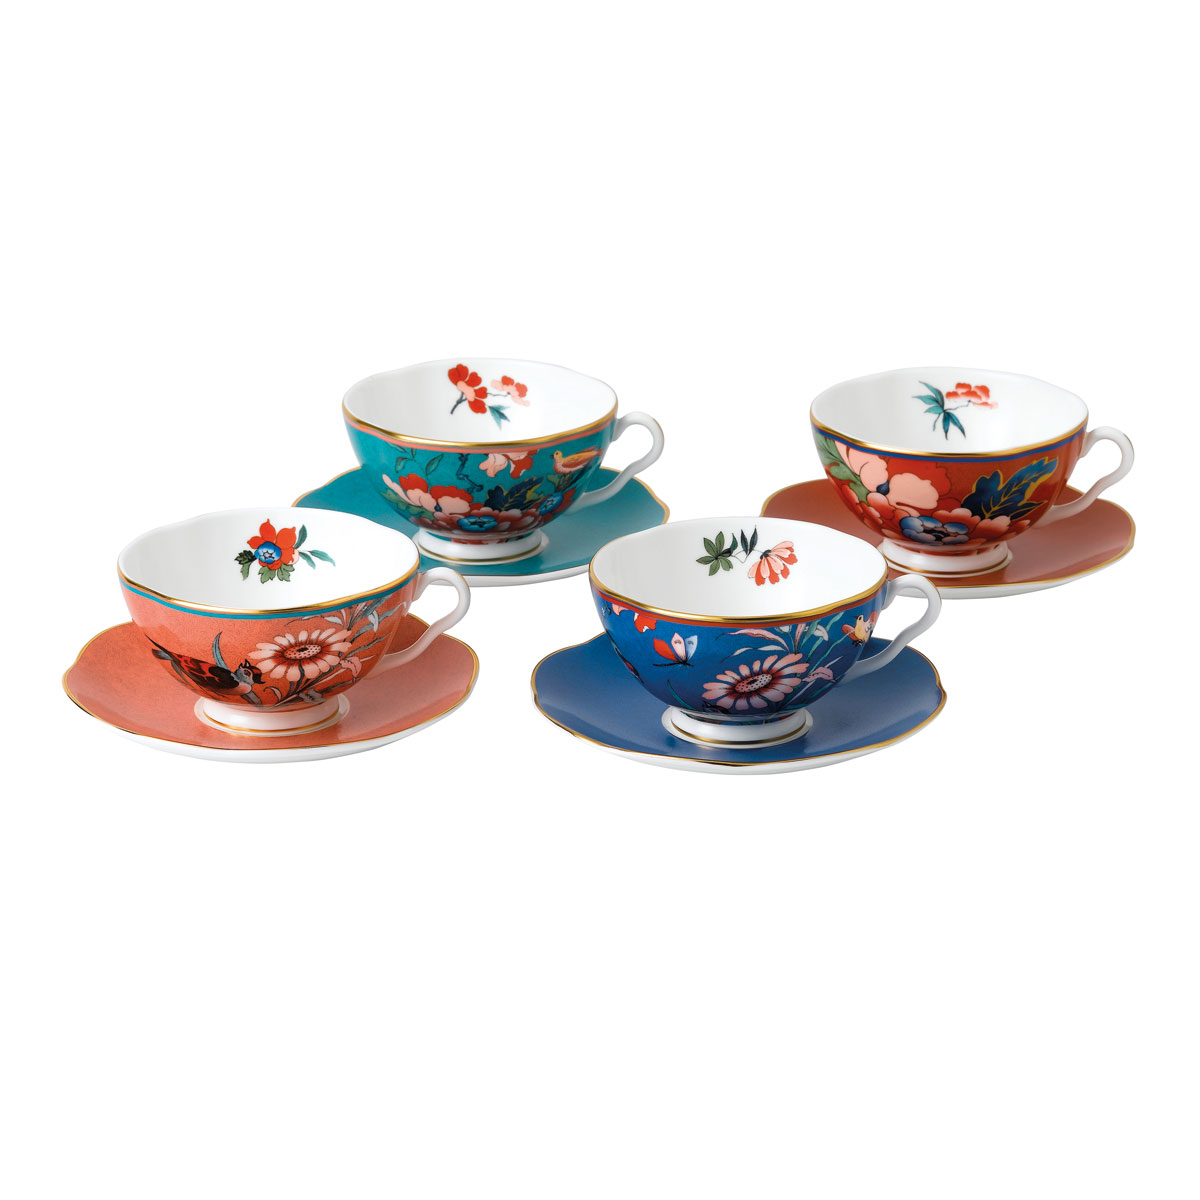 Wedgwood China Paeonia Blush Teacup and Saucer Set of 4, Blue, Coral, Green and Red